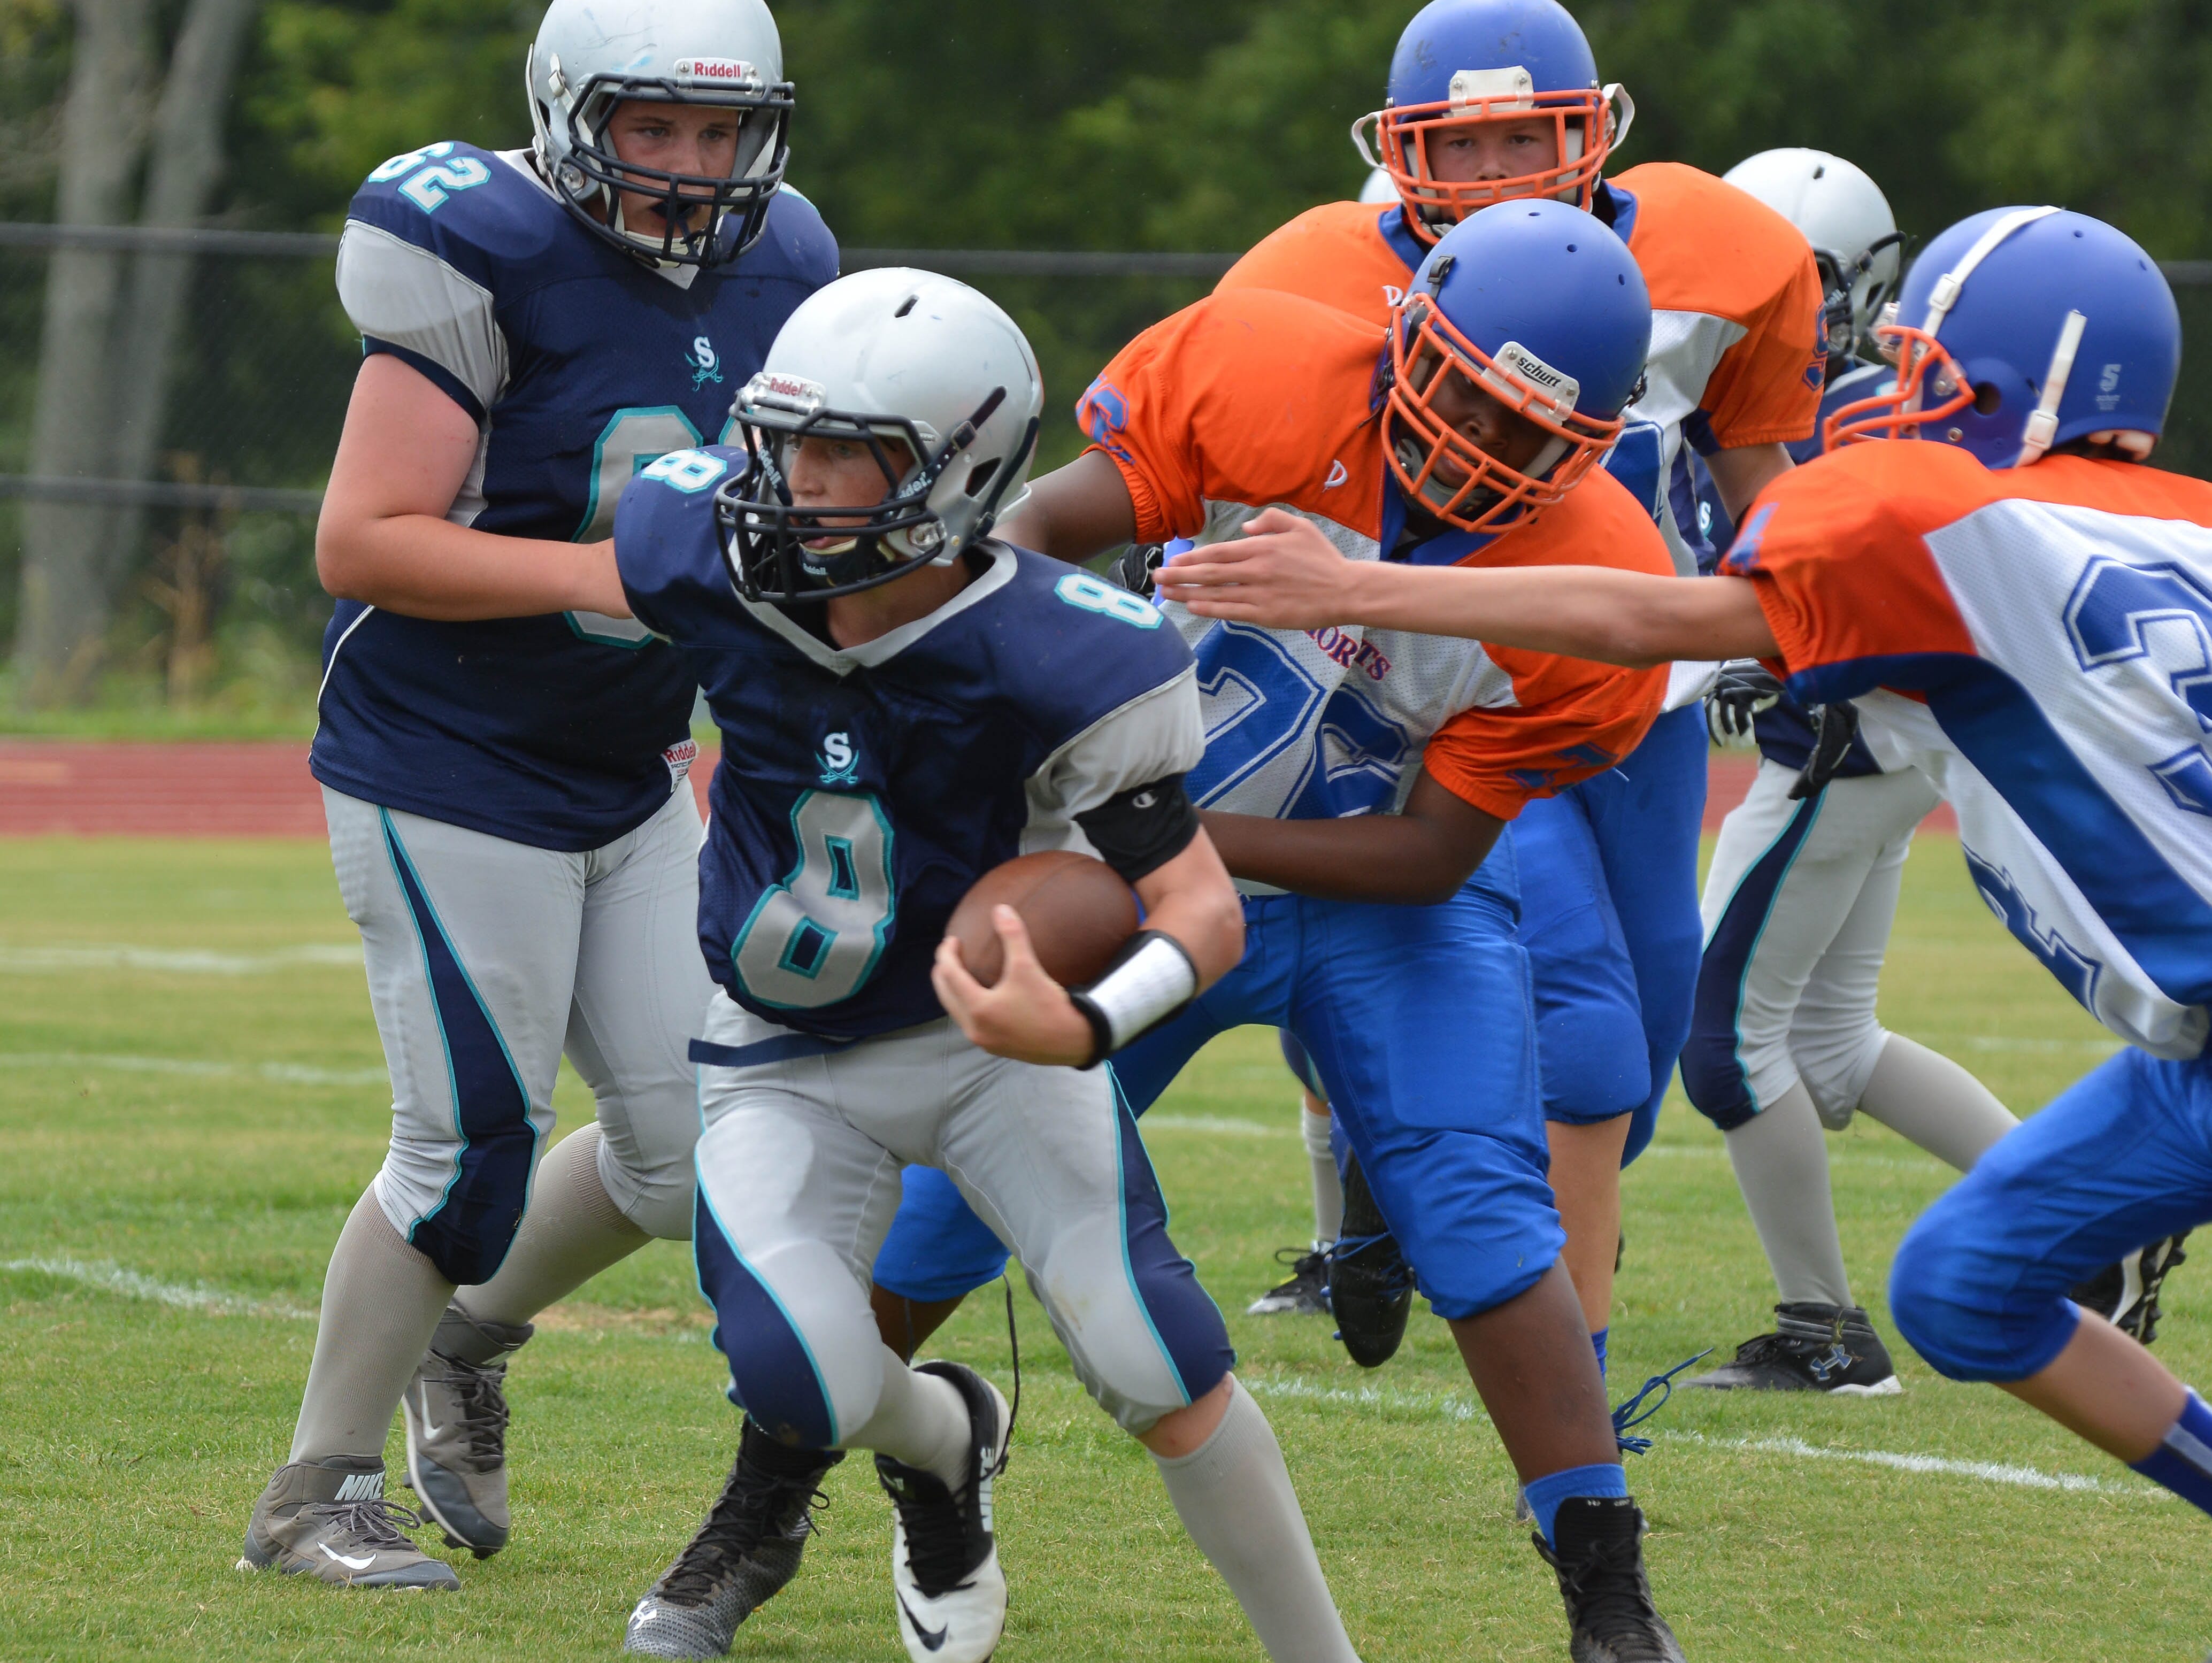 Siegel Middle's Caleb Victory (8) runs up field against Heritage during the Rutherford County Middle School Jamboree at Stewarts Creek in 2014. Victory suffered a head injury during a game in 2015 at Siegel Middle.